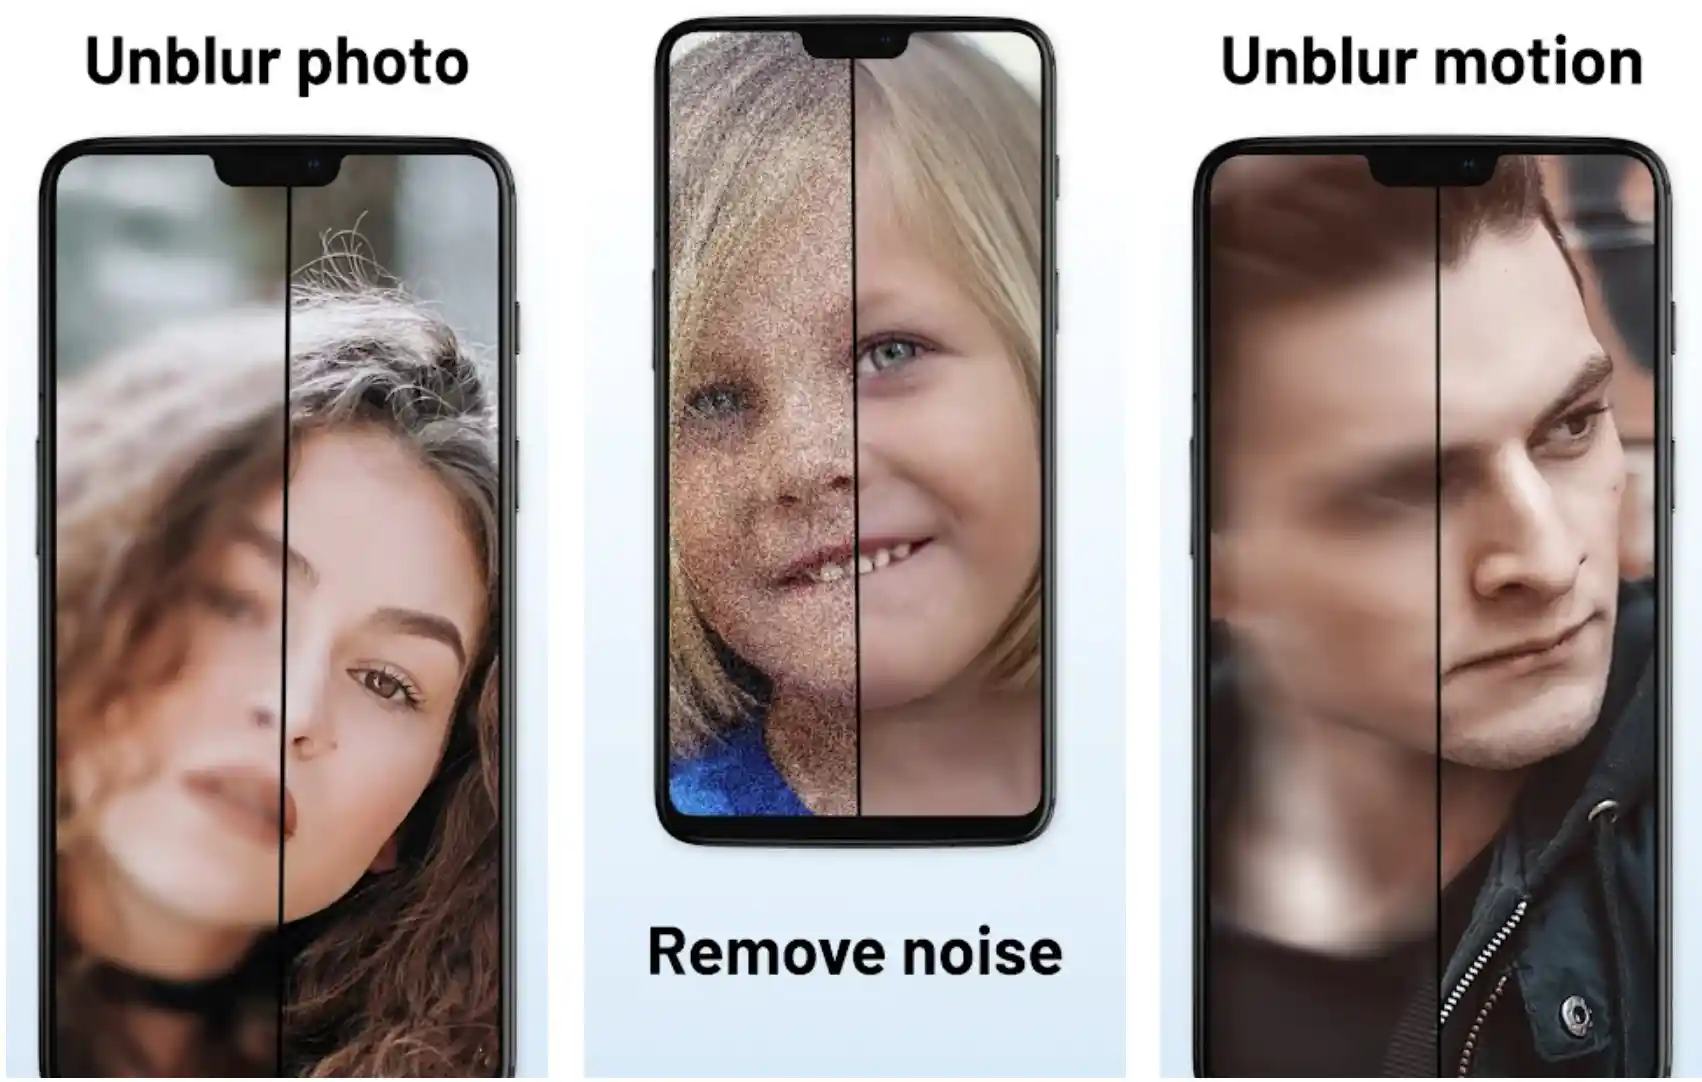 9 Best Apps To Unblur Pictures To Make Blurred Photos Clear